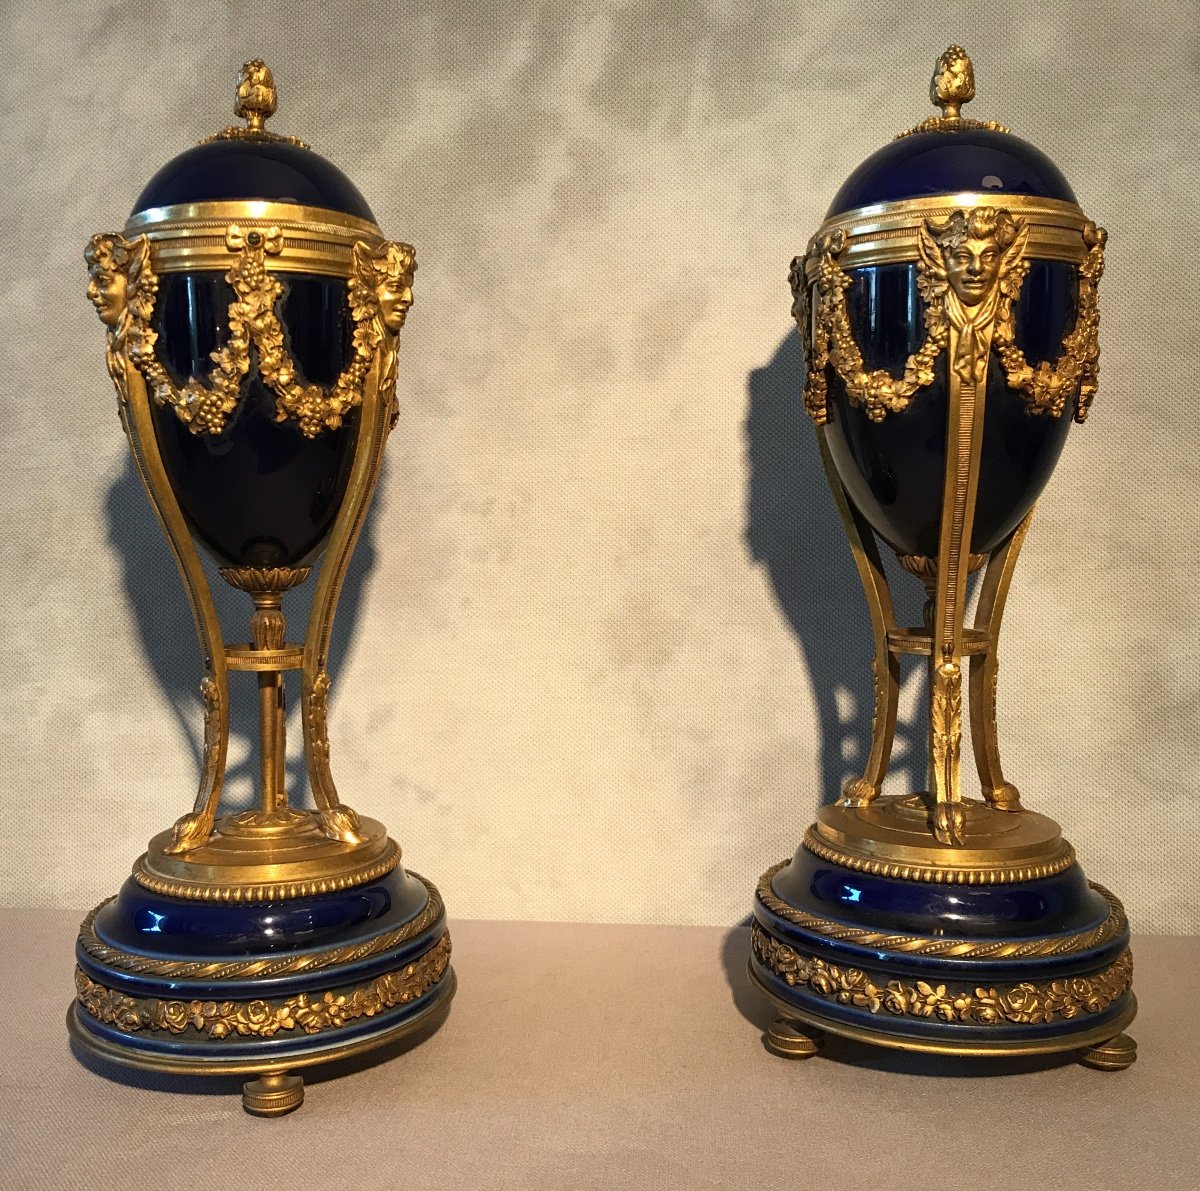 Pair Of Cassolettes Forming Candlesticks In Bronze And Blue Porcelain From The 19th Century-photo-1